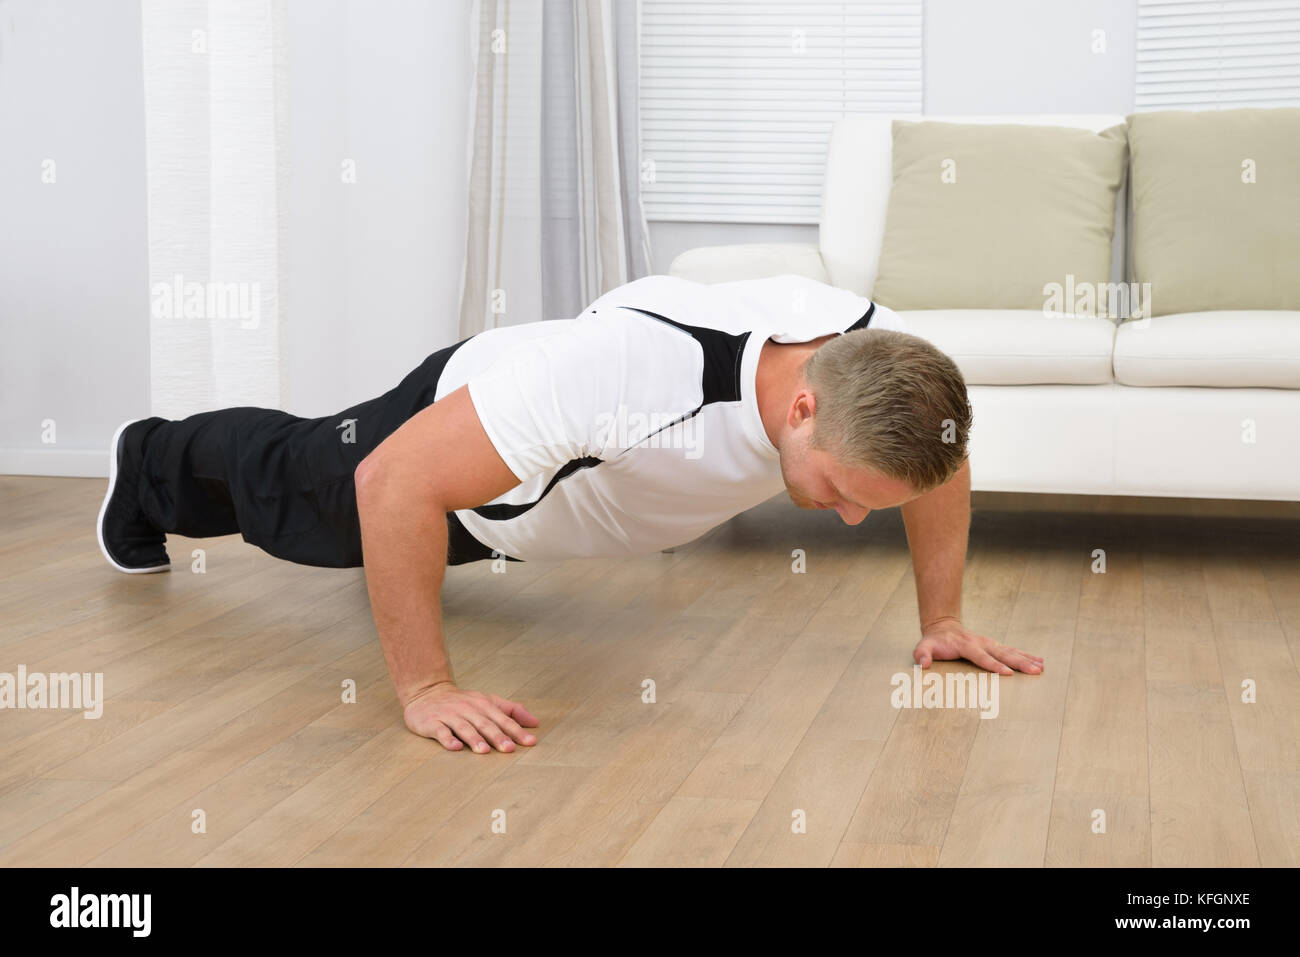 Man Doing Pushup Fitness Exercise At Home Stock Photo